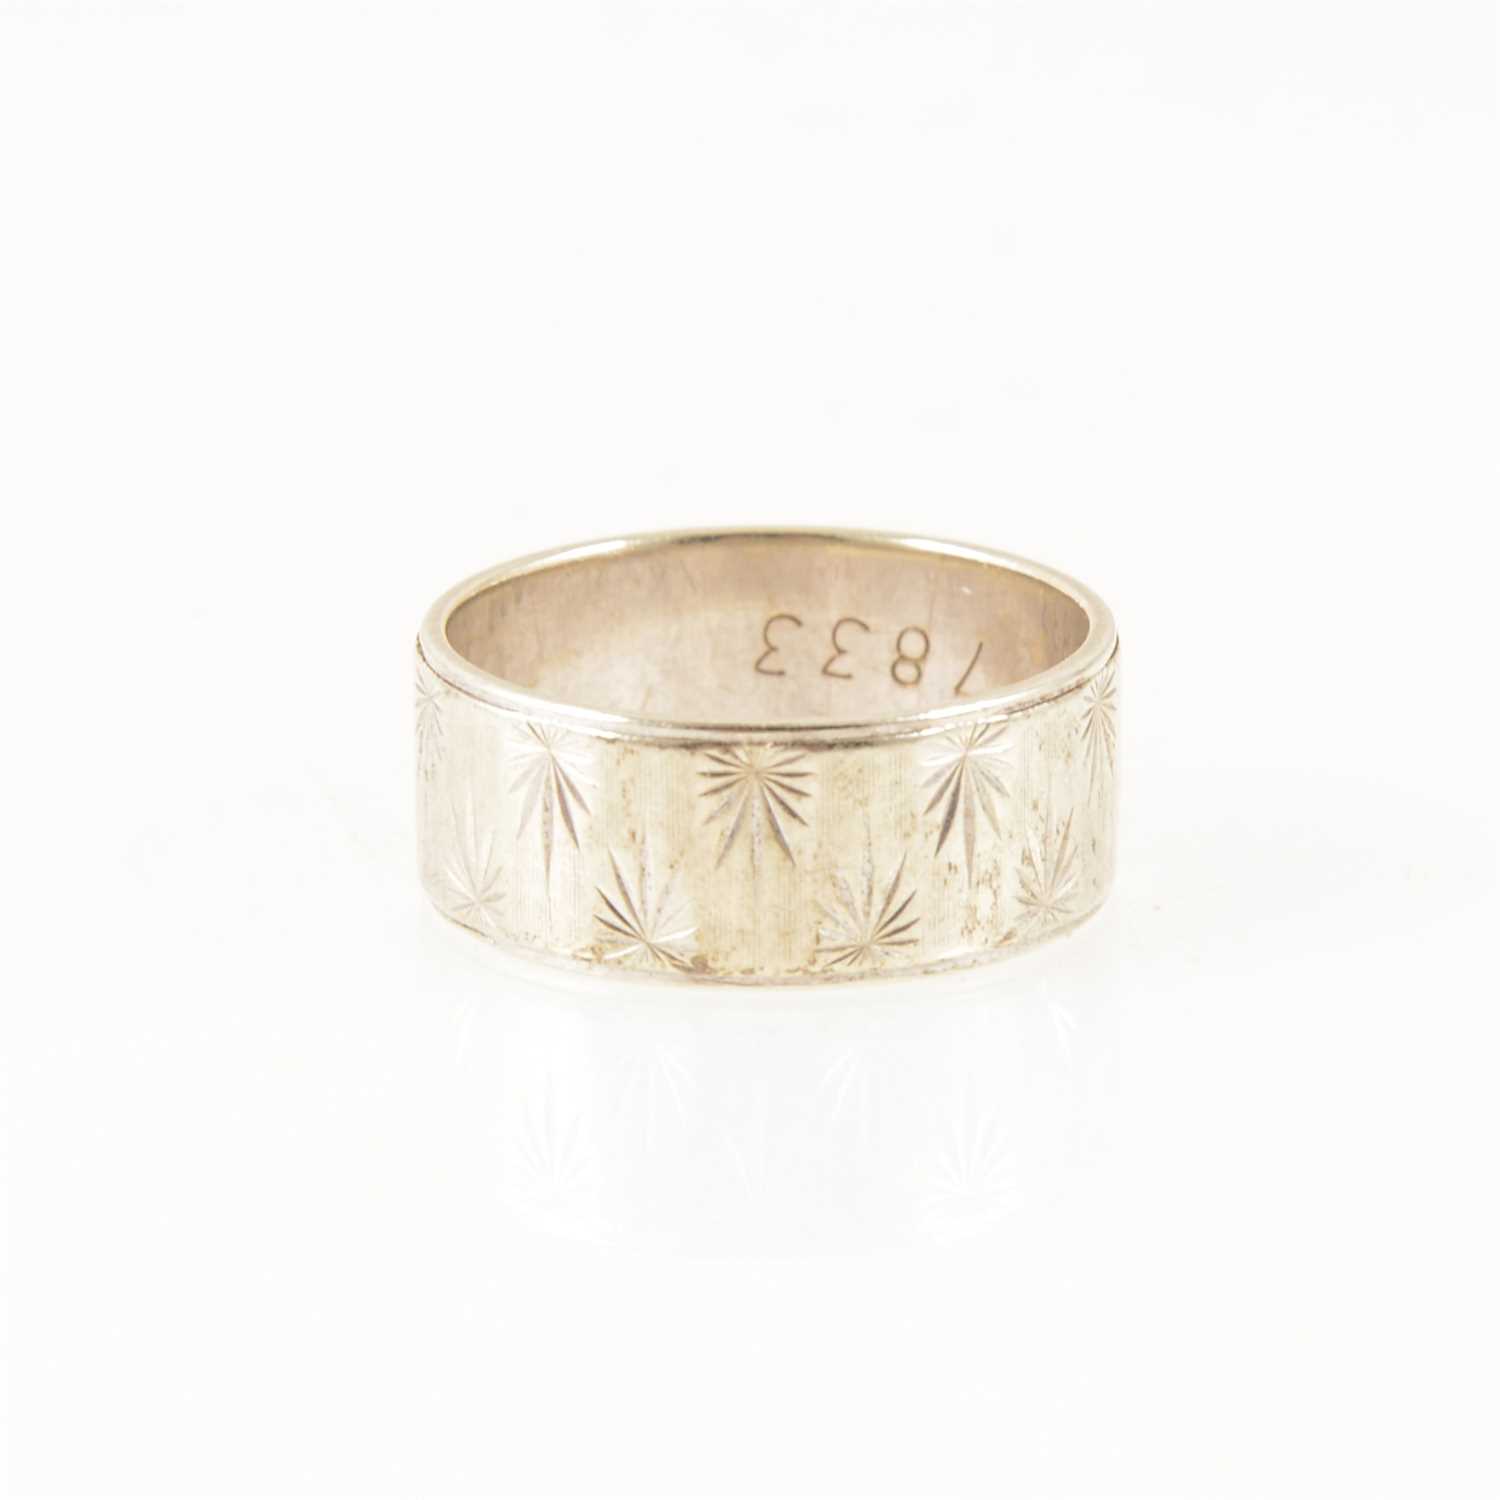 Lot 261 - A 9 carat white gold ring, shank engraved with star pattern, approximate weight 5.5g, ring size P.